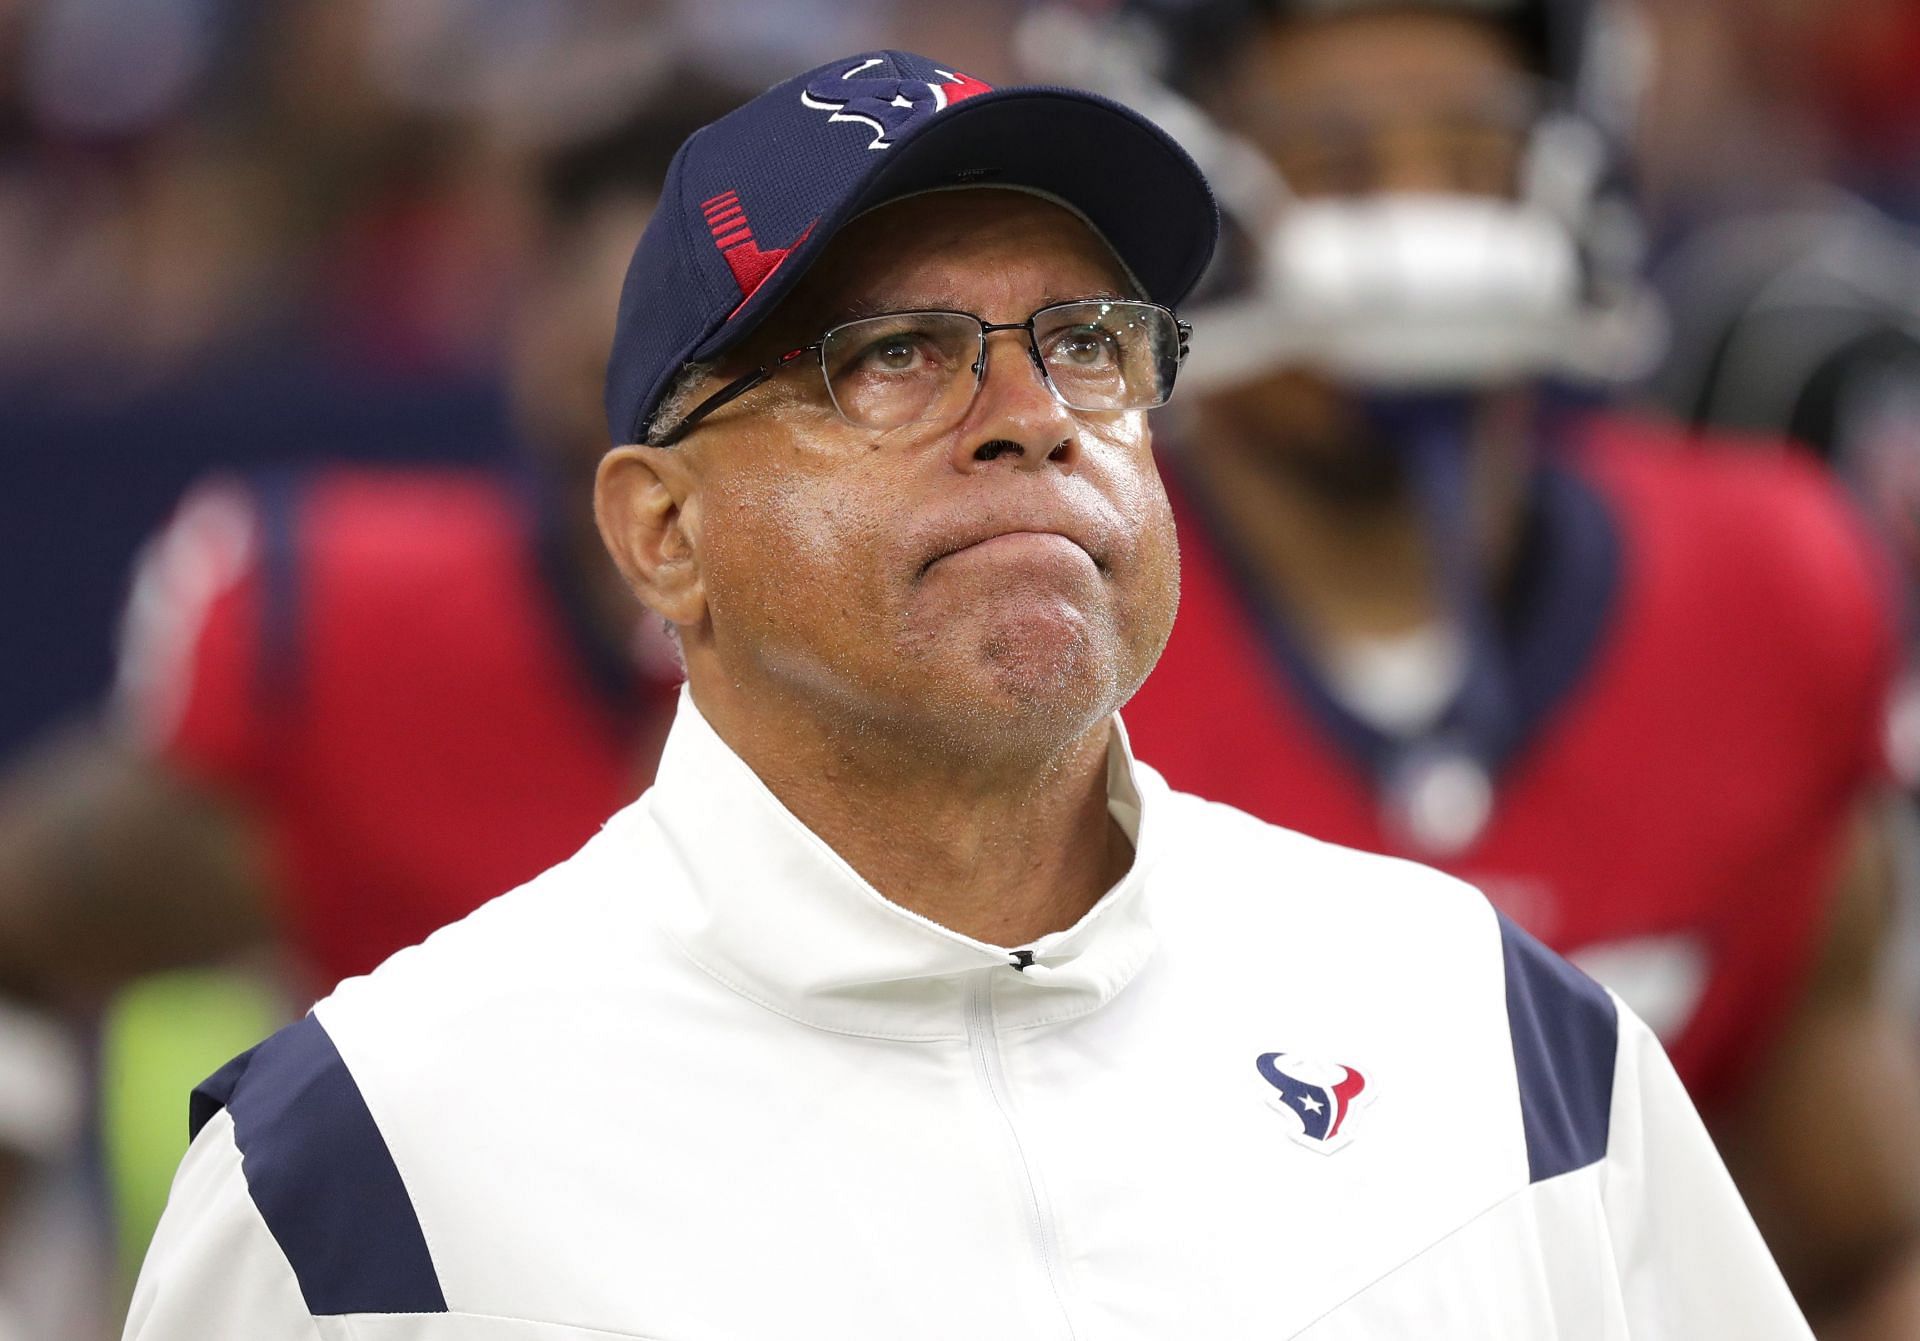 Houston Texans head coach David Culley might not be brought back in 2022